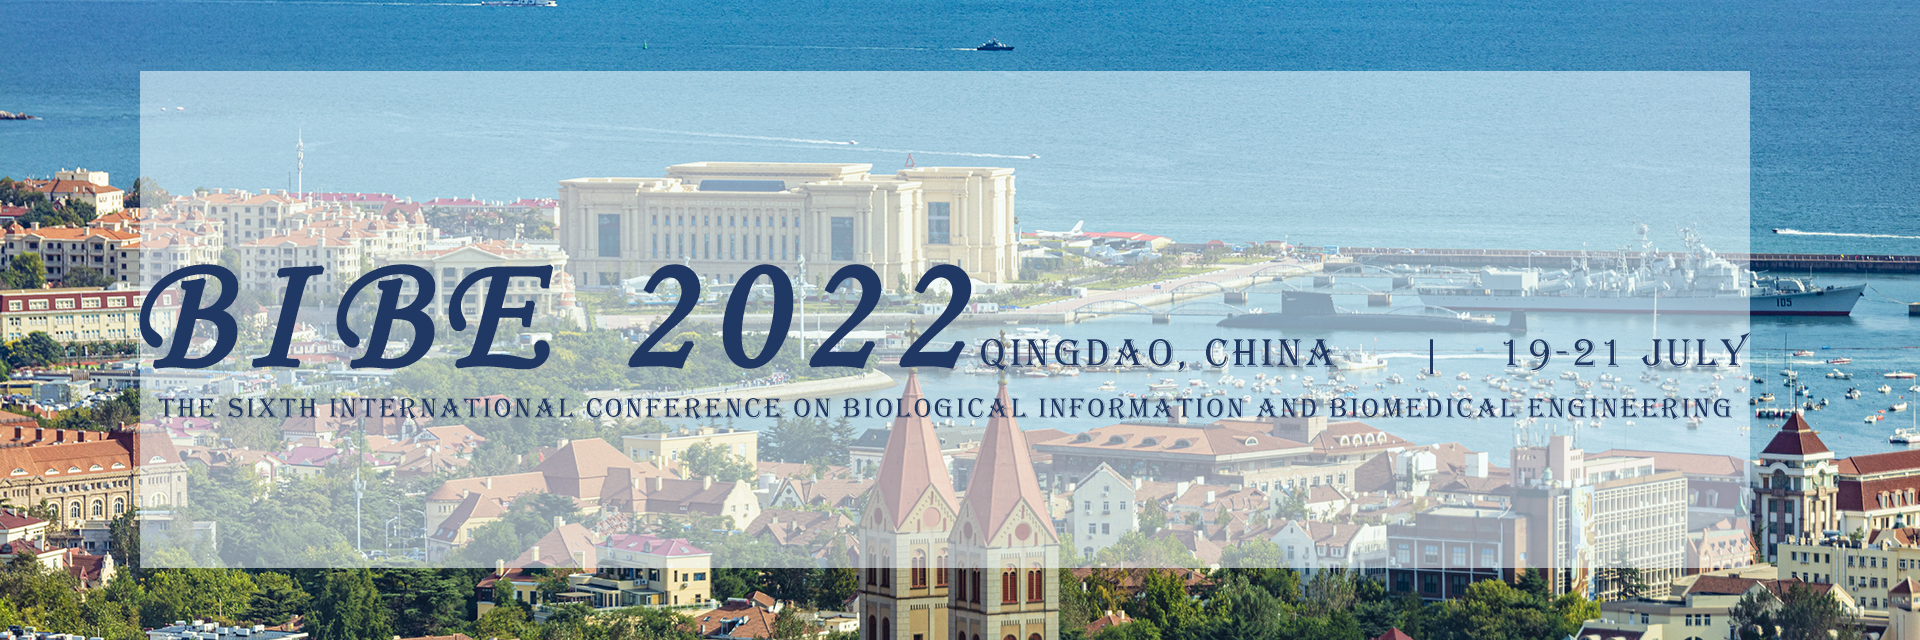 The Sixth International Conference on Biological Information and Biomedical Engineering 